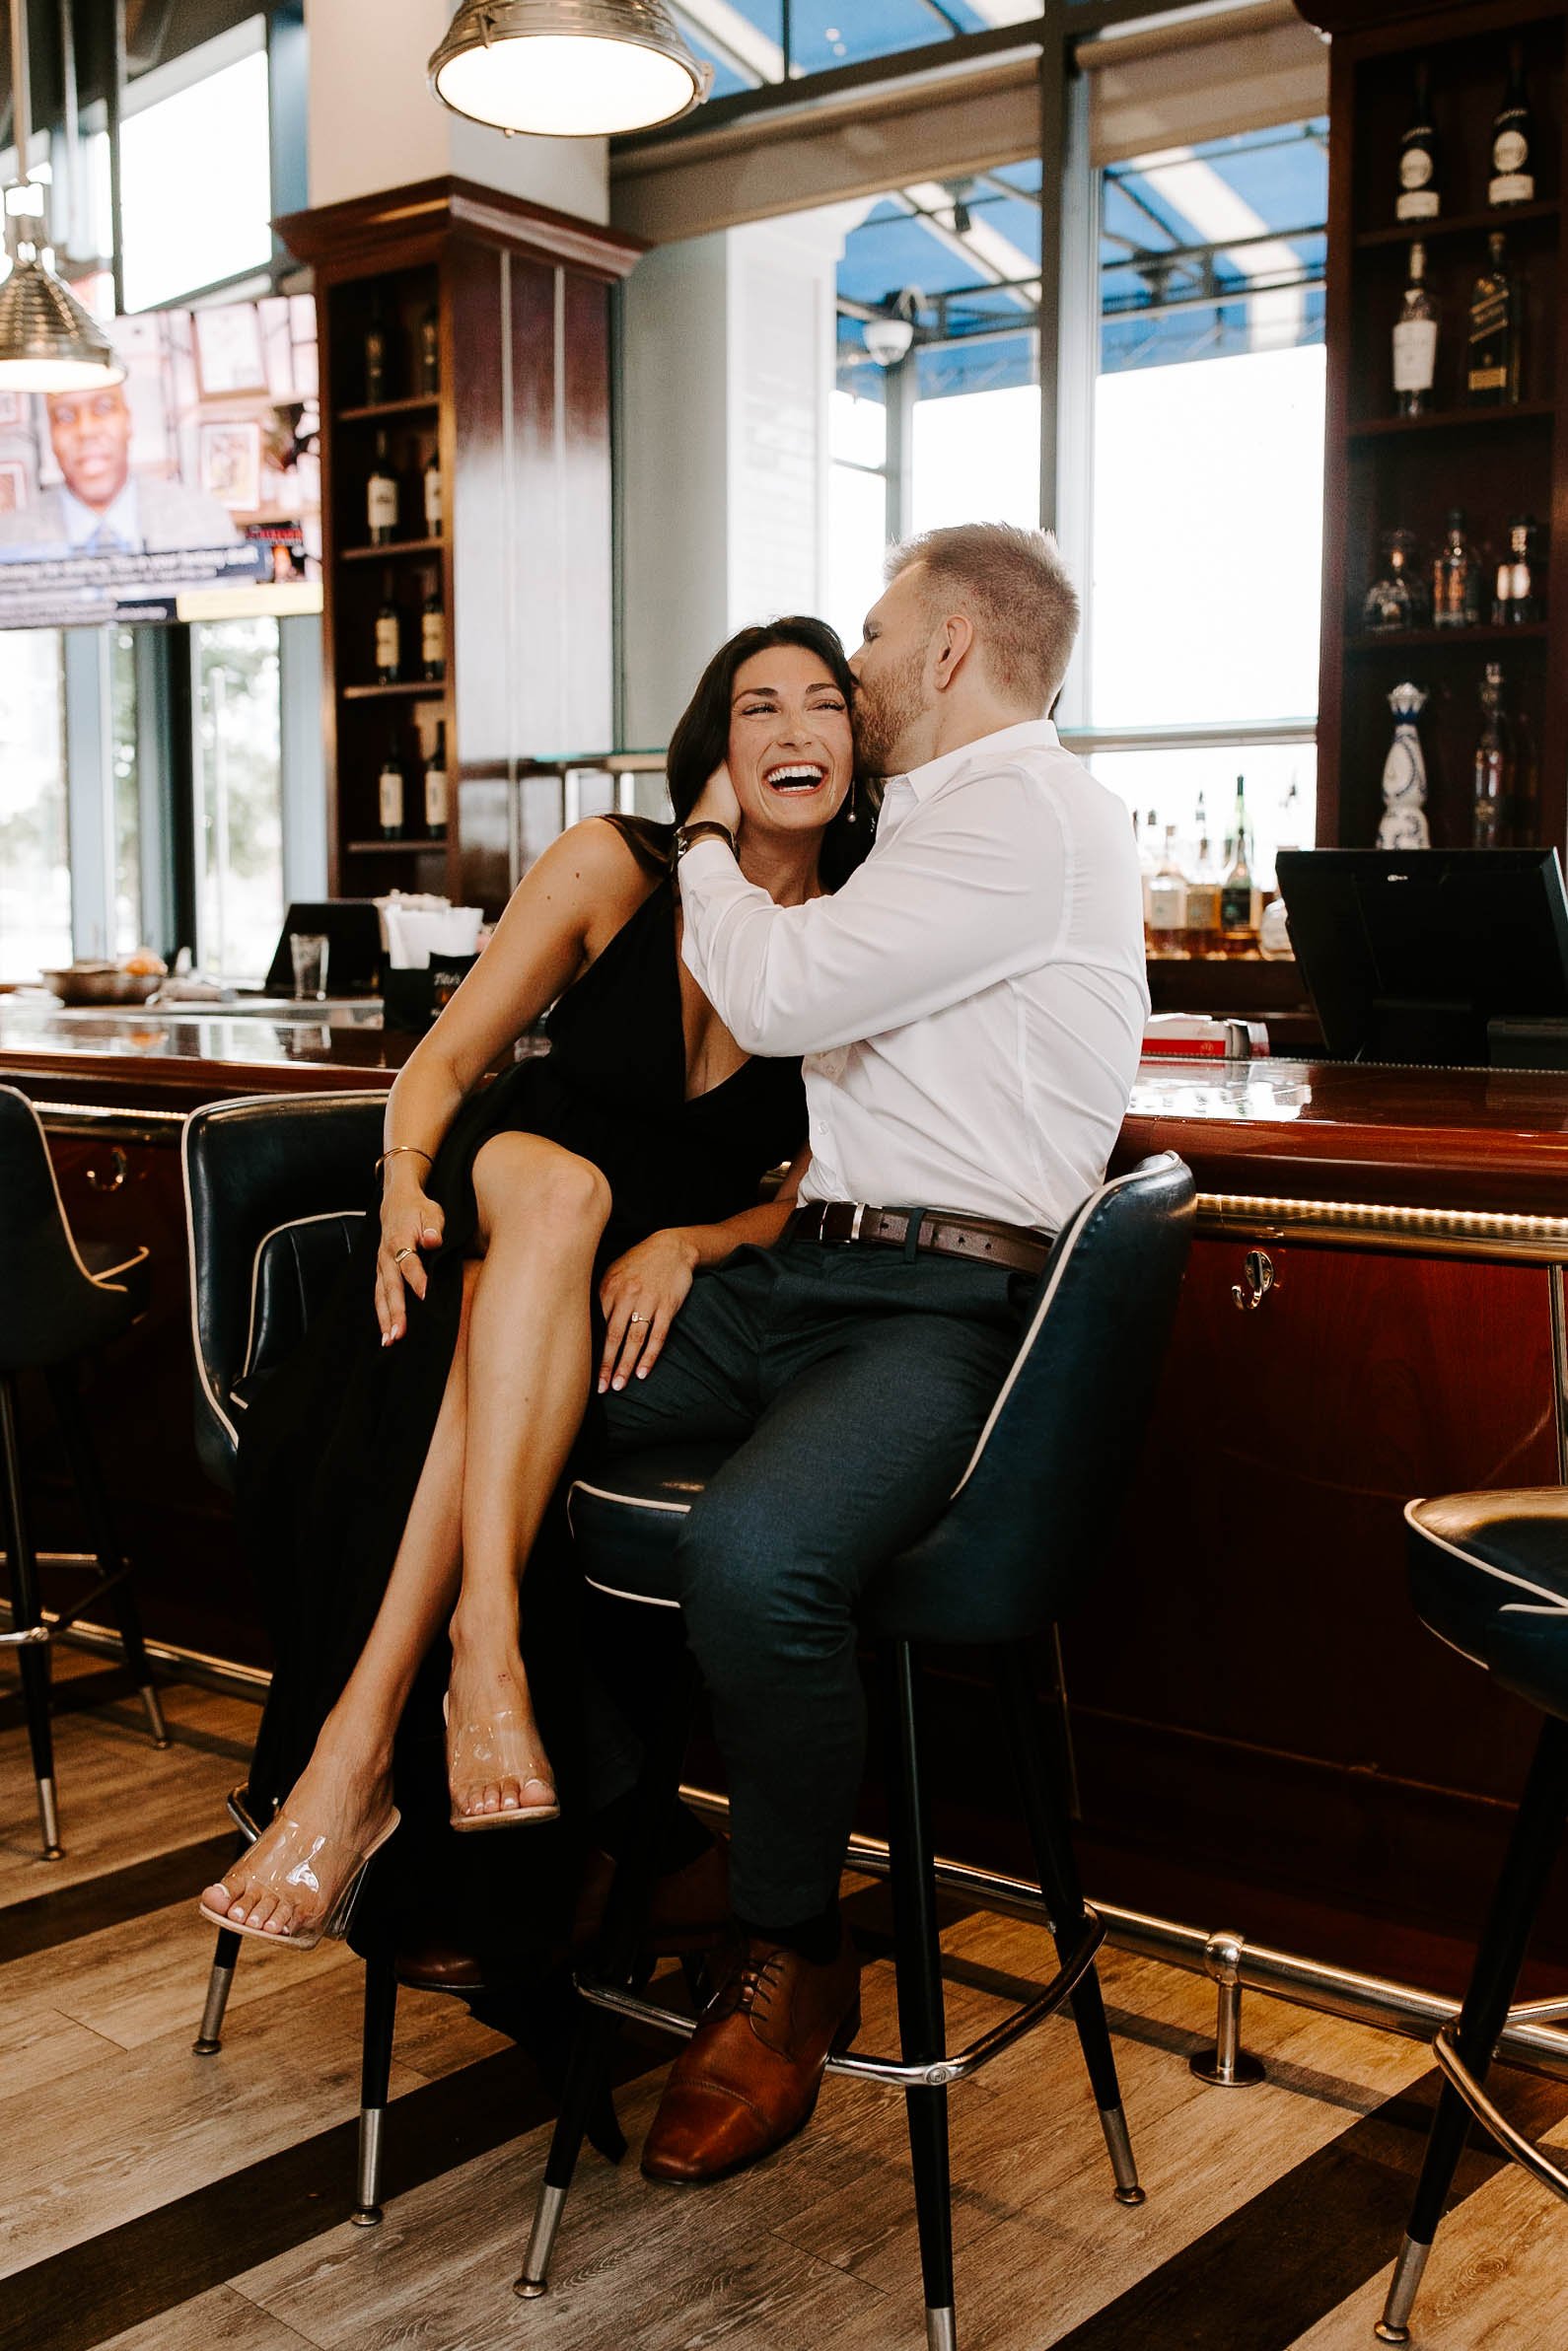  Boyfriend kissing girlfriend’s head while she laughs and smiles while sitting at a restaurant bar  